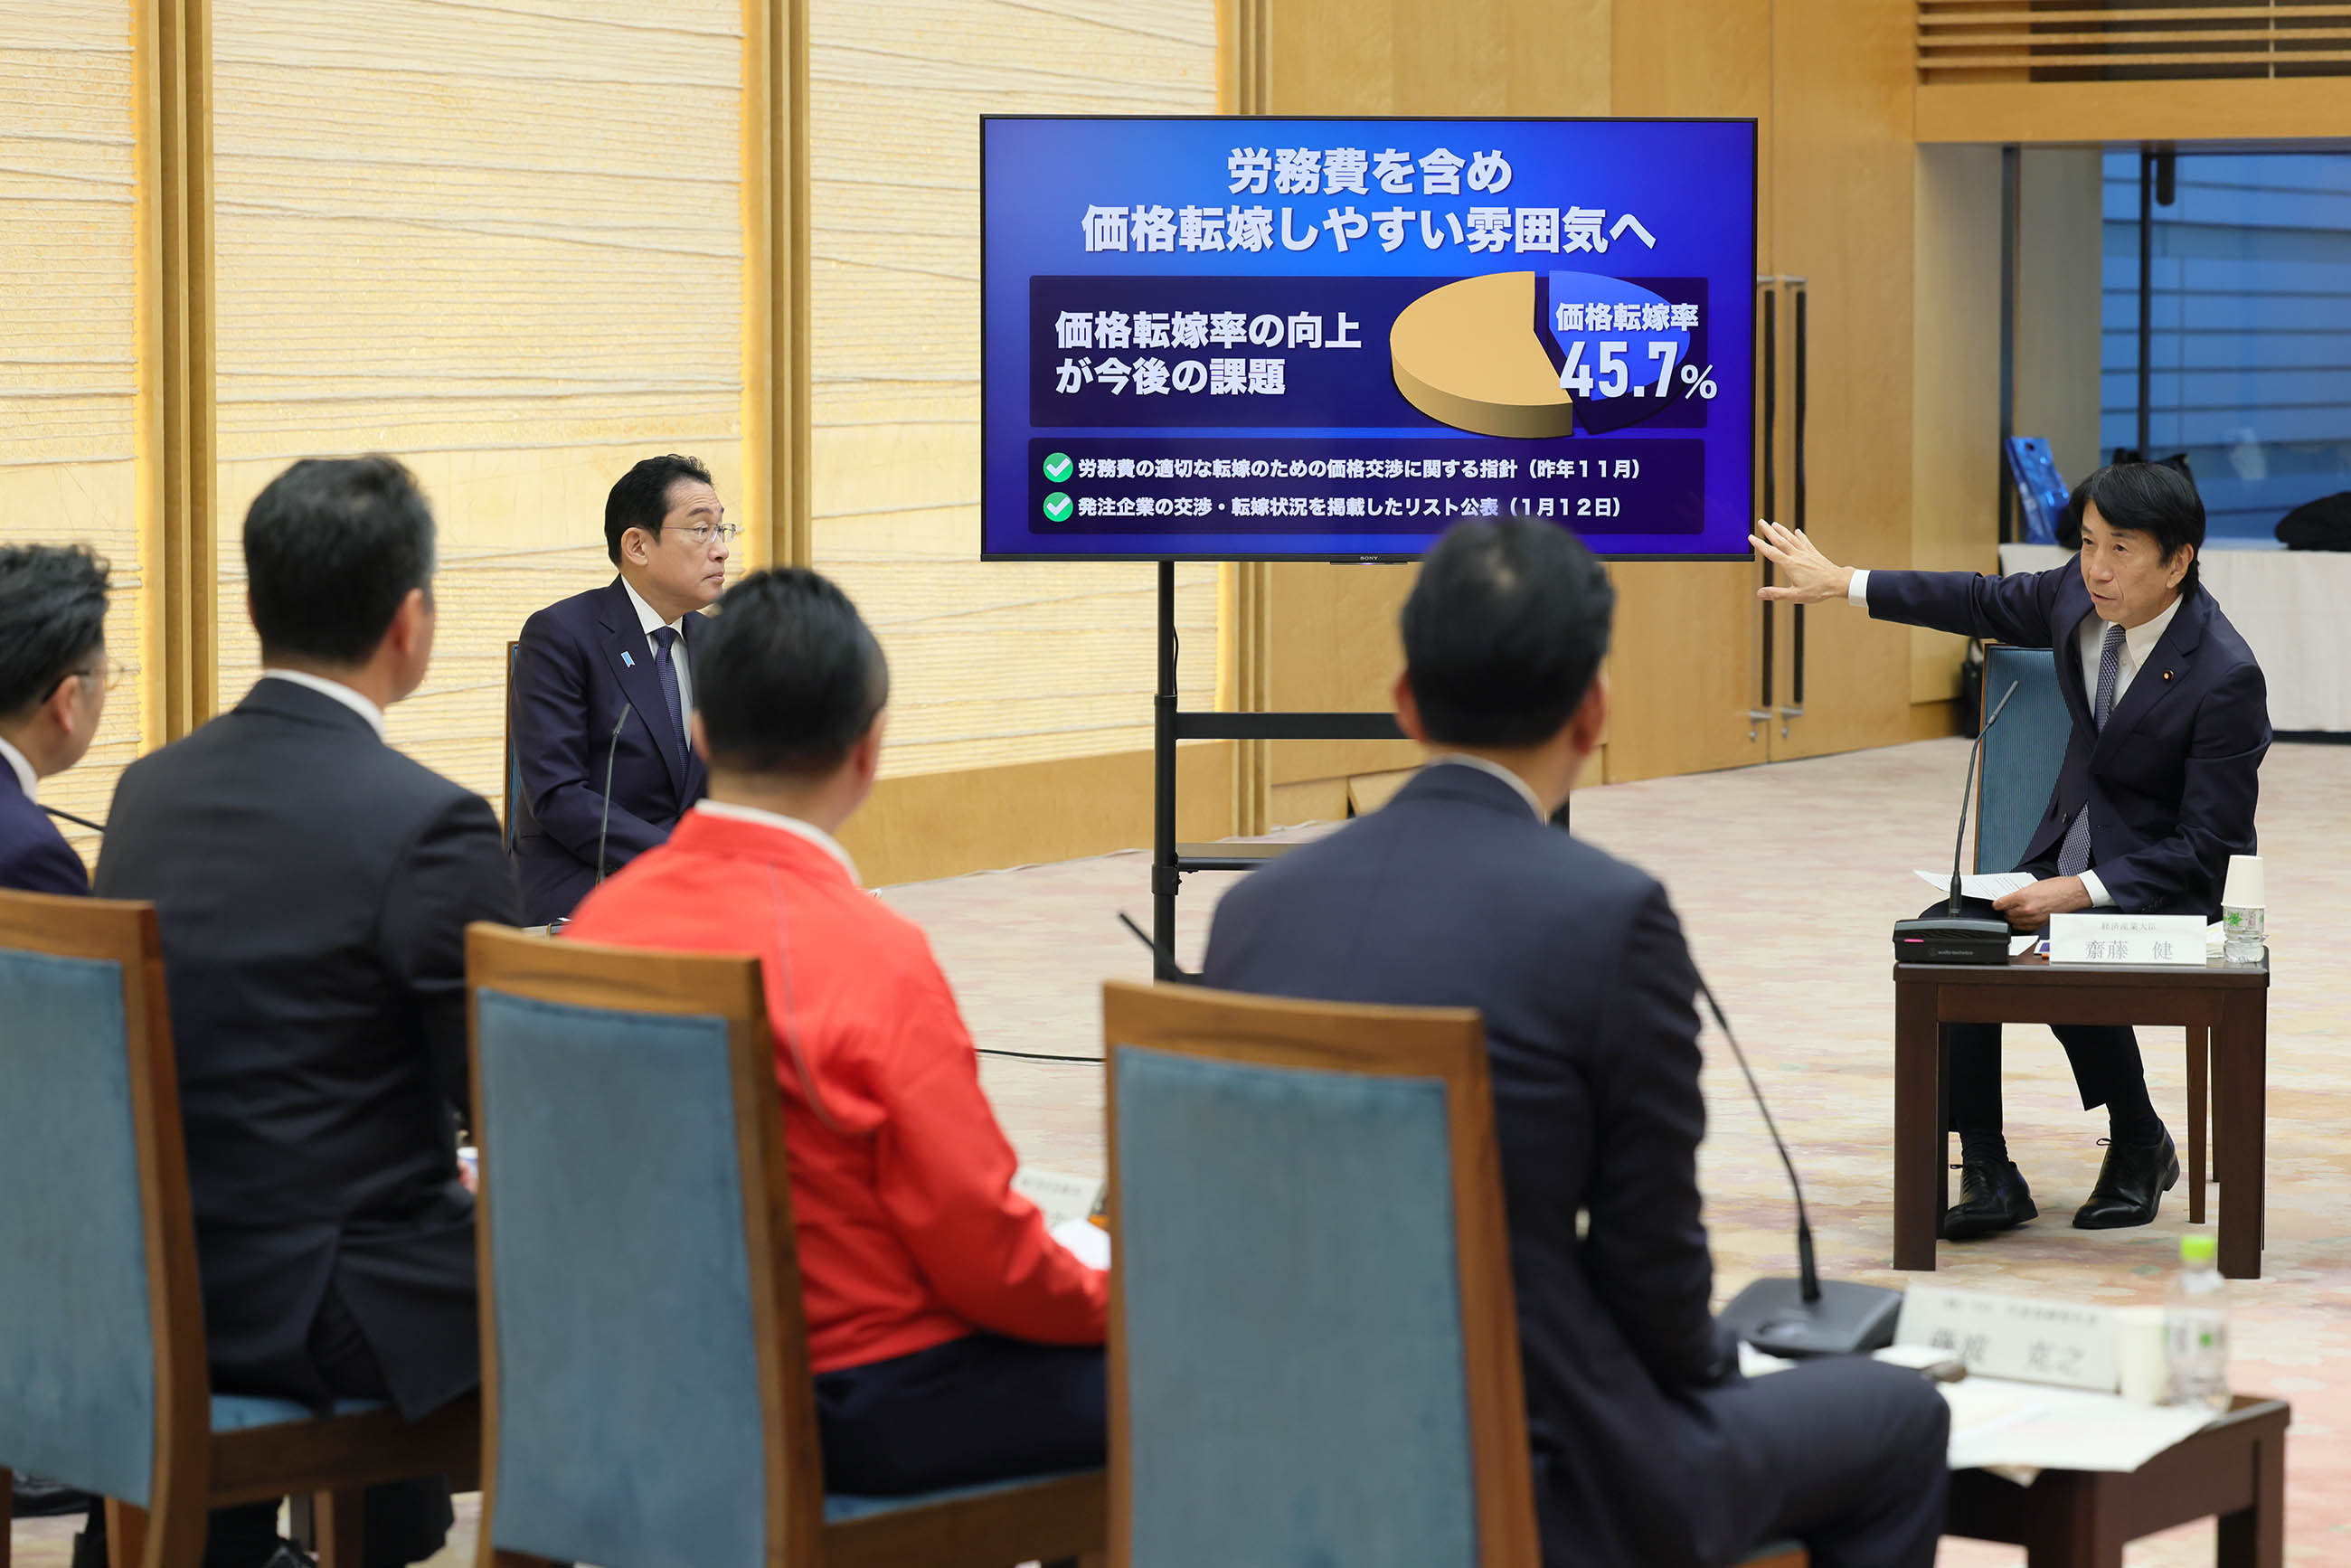 Prime Minister Kishida listening to participants of a small group talk (2)